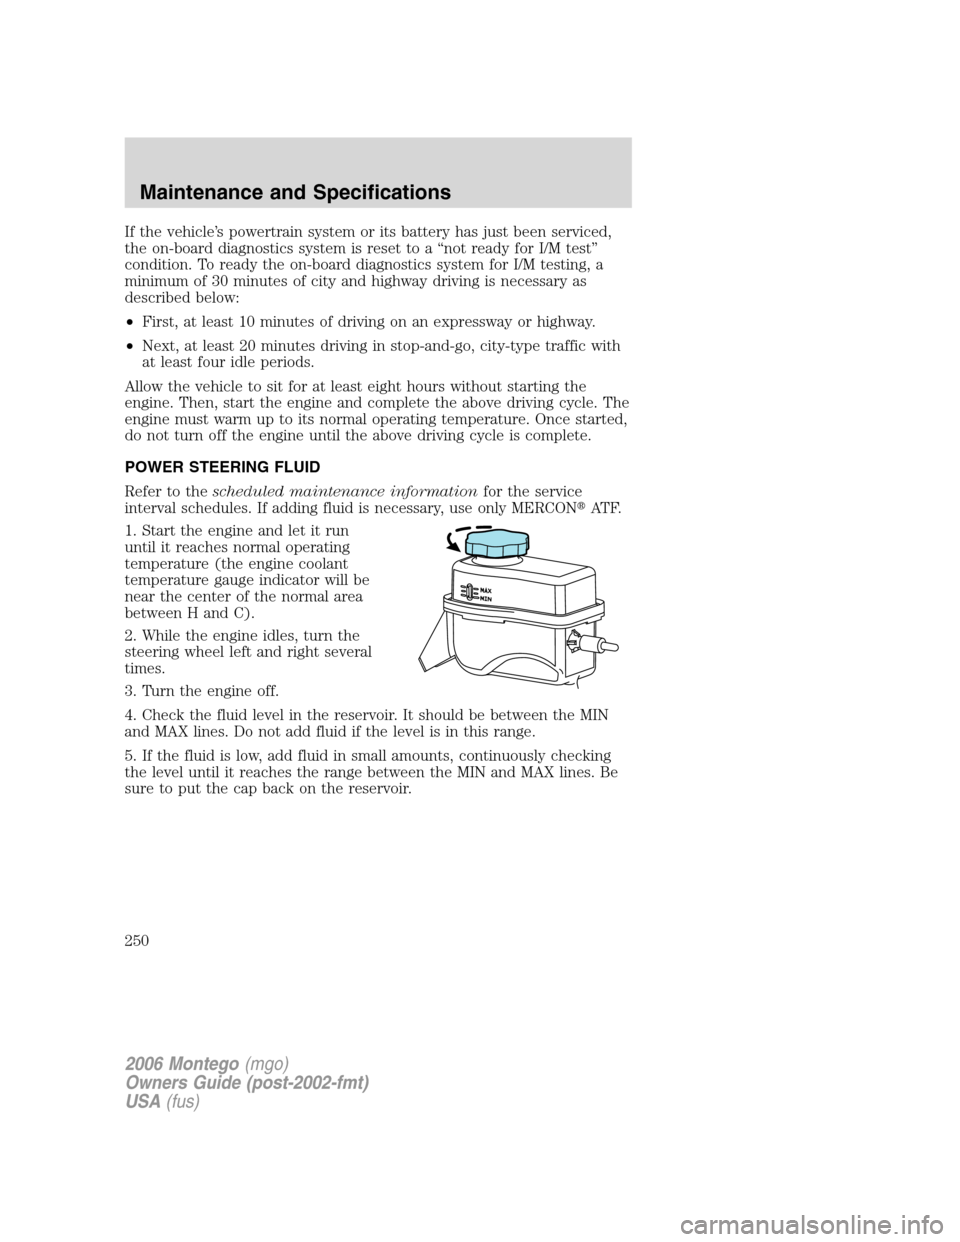 Mercury Montego 2006  Owners Manuals If the vehicle’s powertrain system or its battery has just been serviced,
the on-board diagnostics system is reset to a “not ready for I/M test”
condition. To ready the on-board diagnostics syst